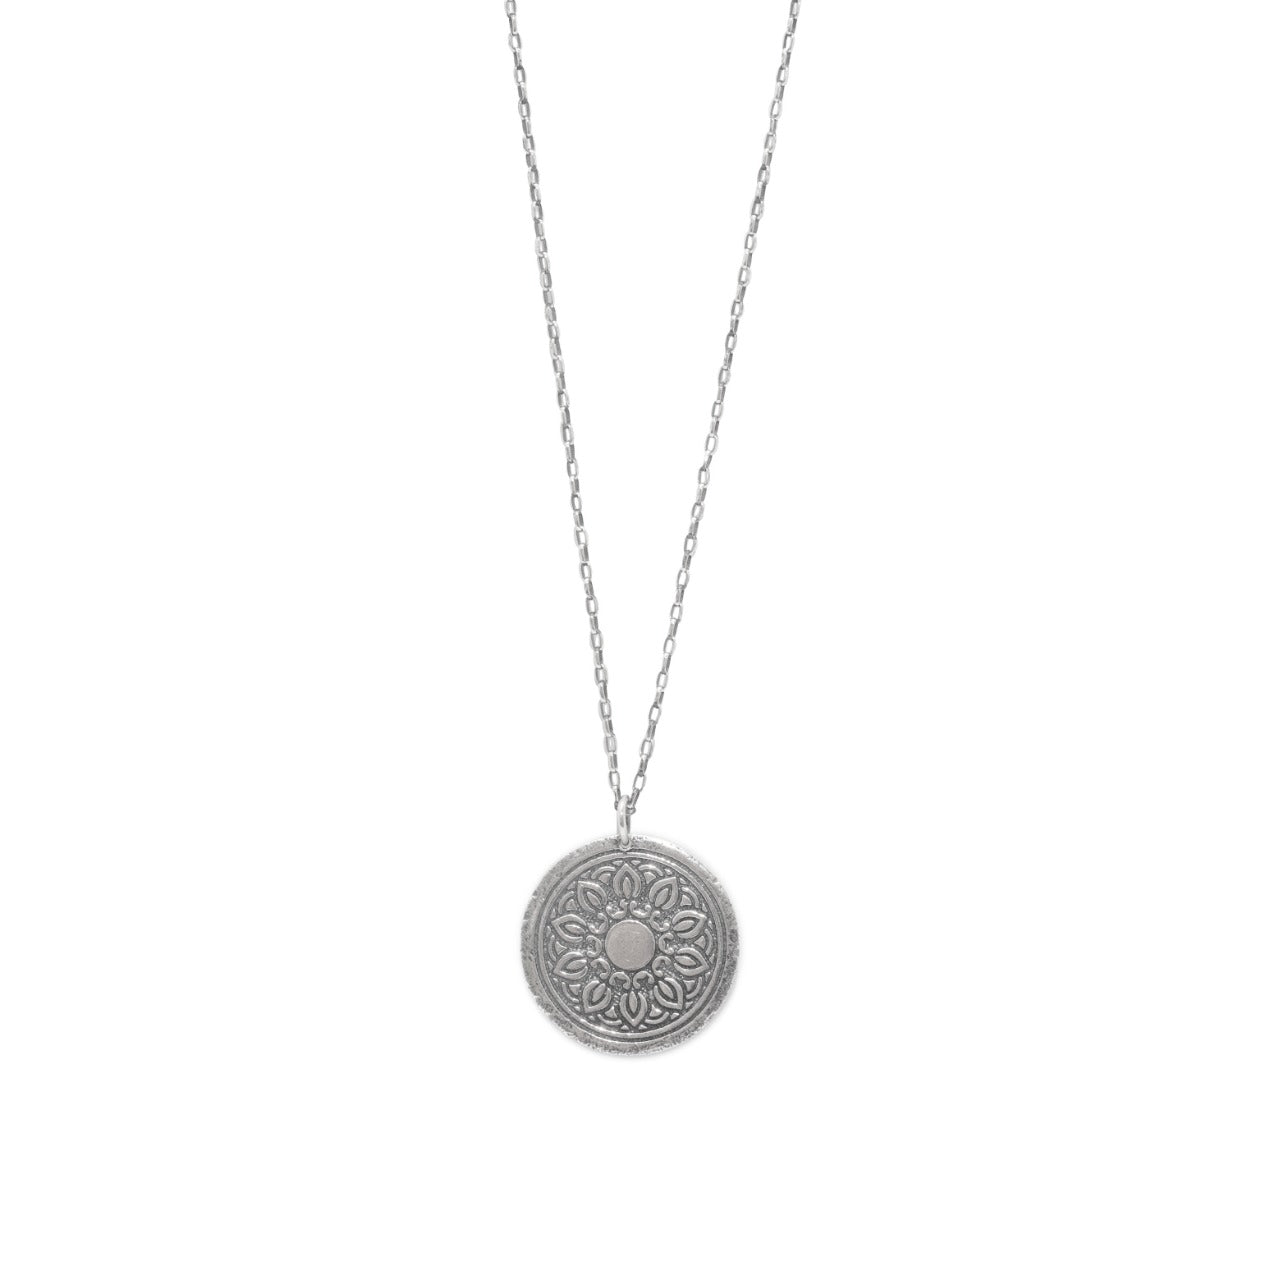 COLLIER HOMME - ROSE SAUVAGE